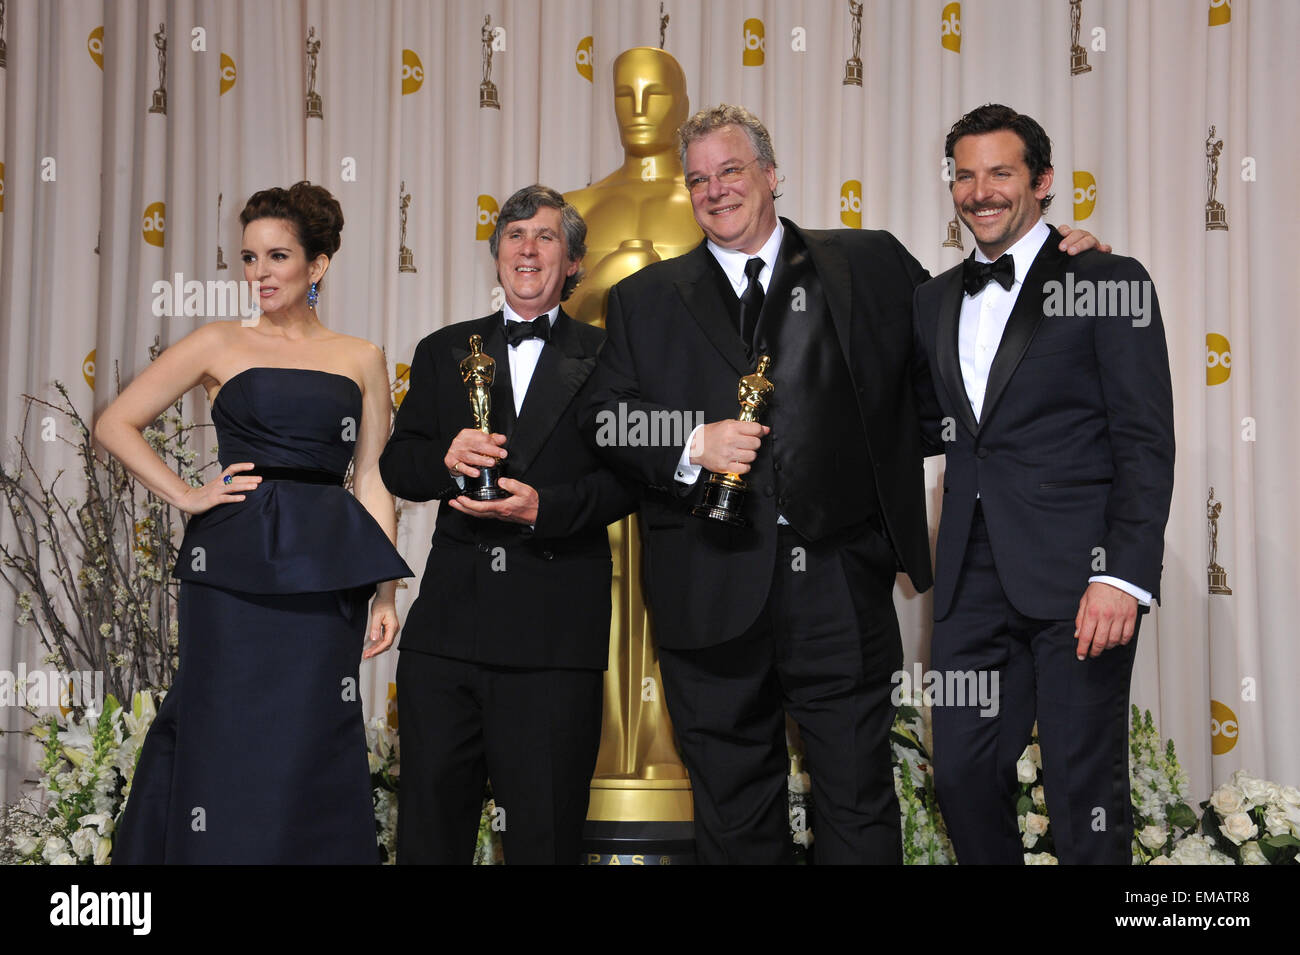 LOS ANGELES, CA - FEBRUARY 26, 2012: Tom Fleischman & John Midgley, winners for Best Sound Mixing for Hugo, with presenters Tina Fey & Bradley Cooper at the 82nd Academy Awards at the Hollywood & Highland Theatre, Hollywood. Stock Photo